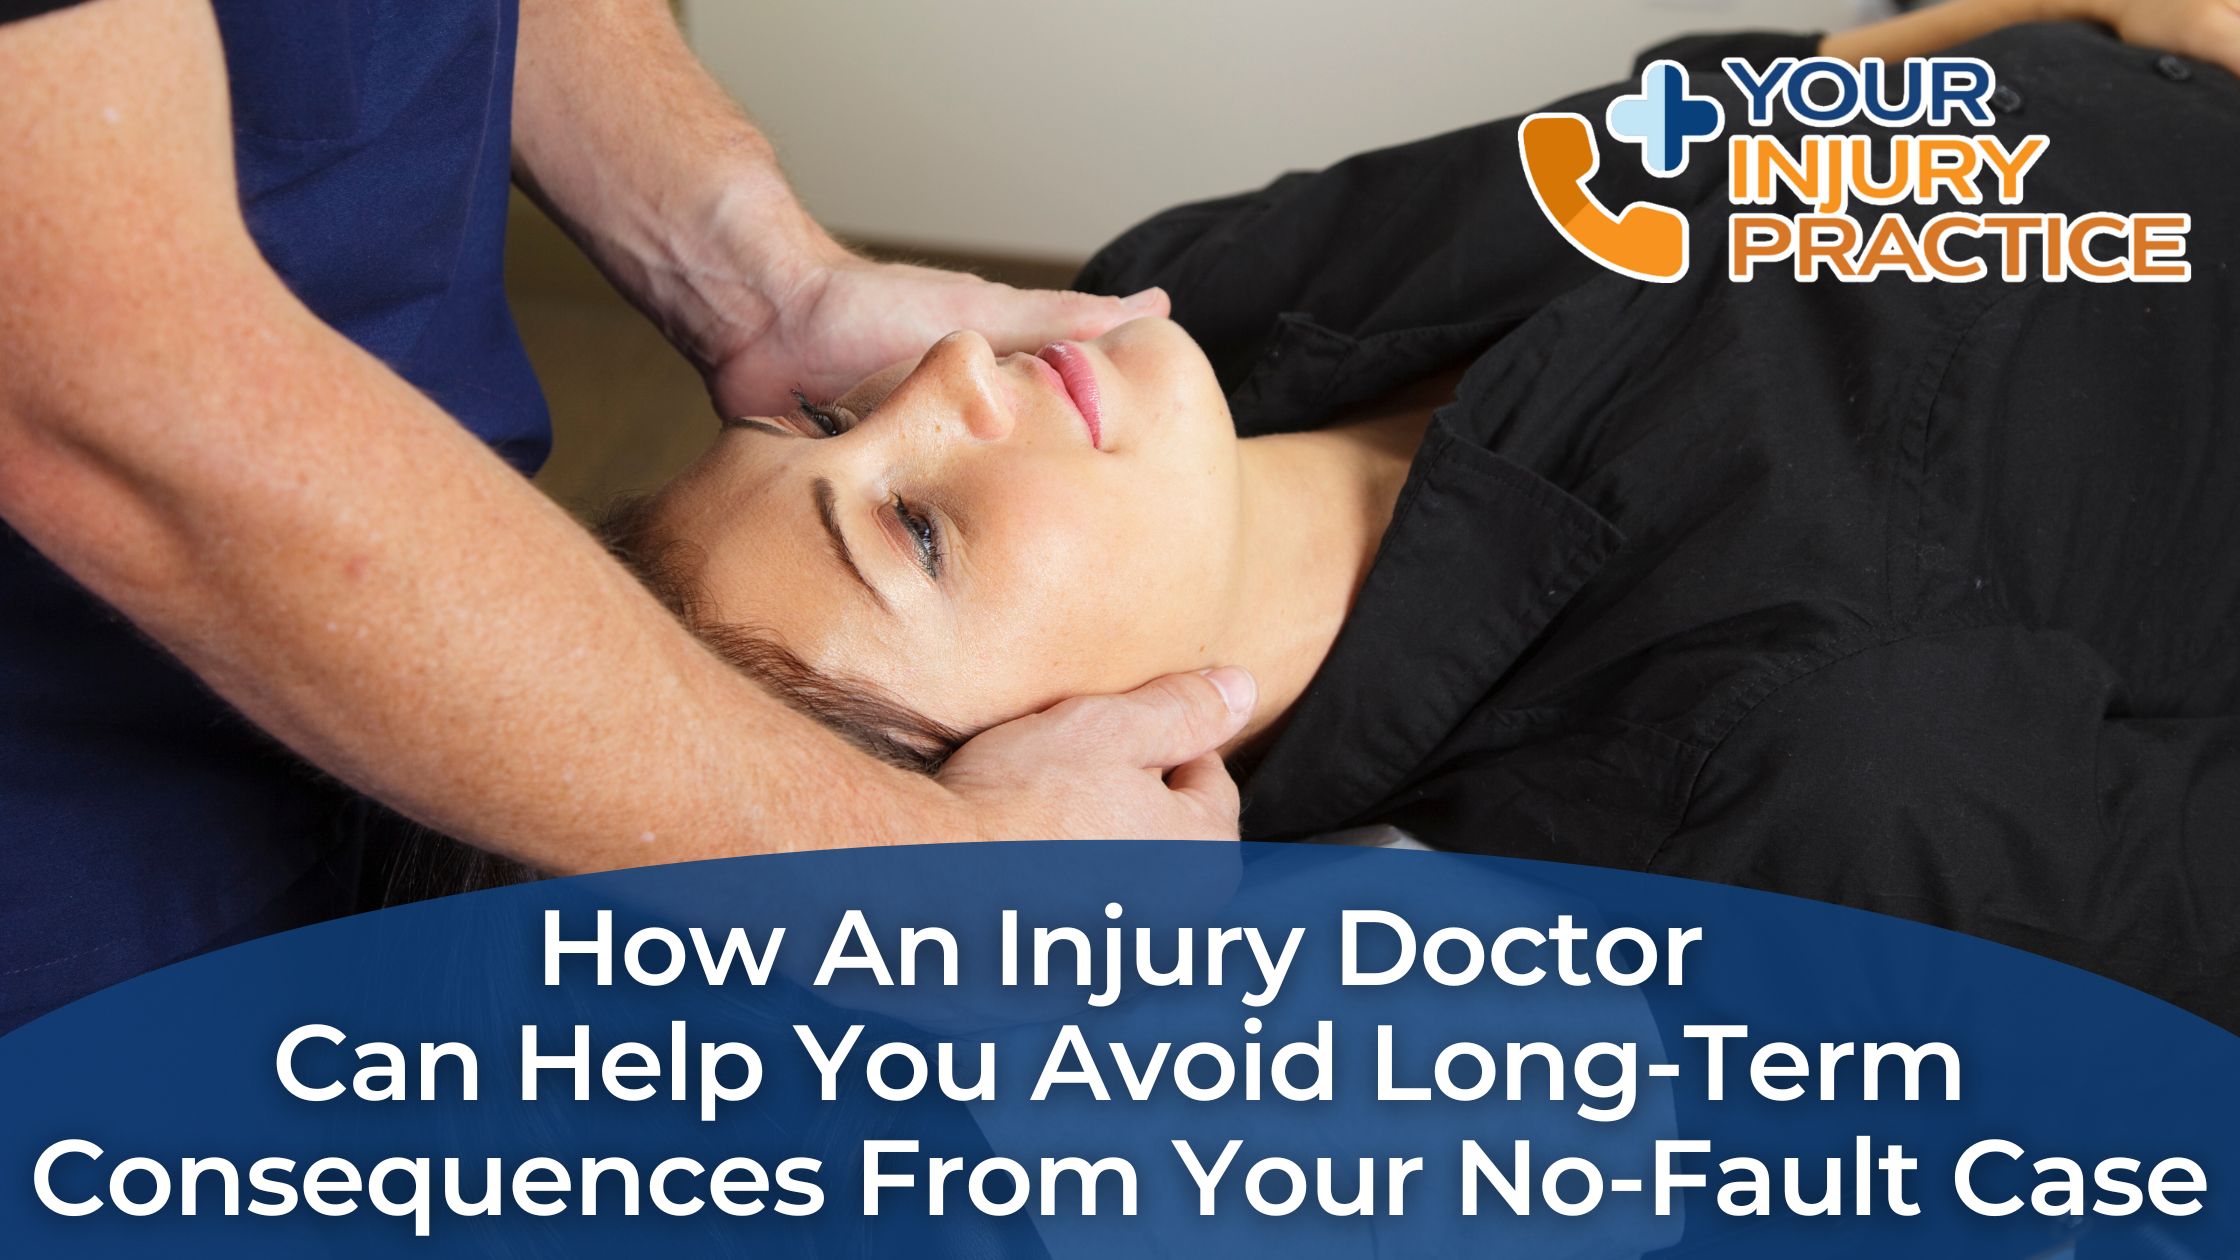 How an Injury Doctor Can Help You Avoid Long-Term Consequences from Your No Fault Case